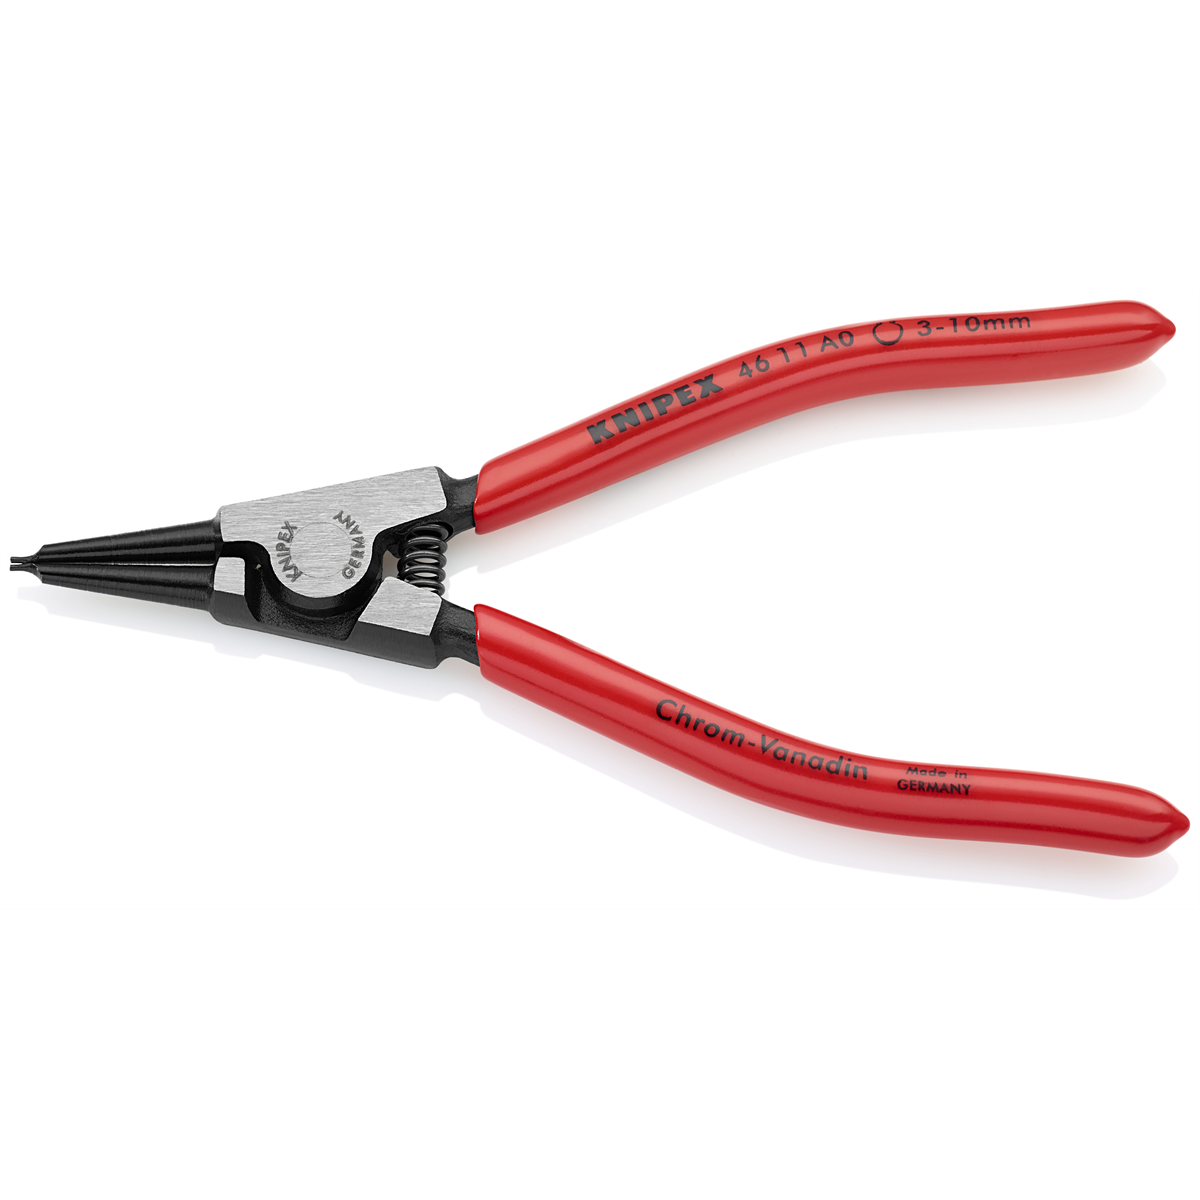 4611-A0 External Snap Ring Pliers 46 11 A0 - Straight - 3-10mm